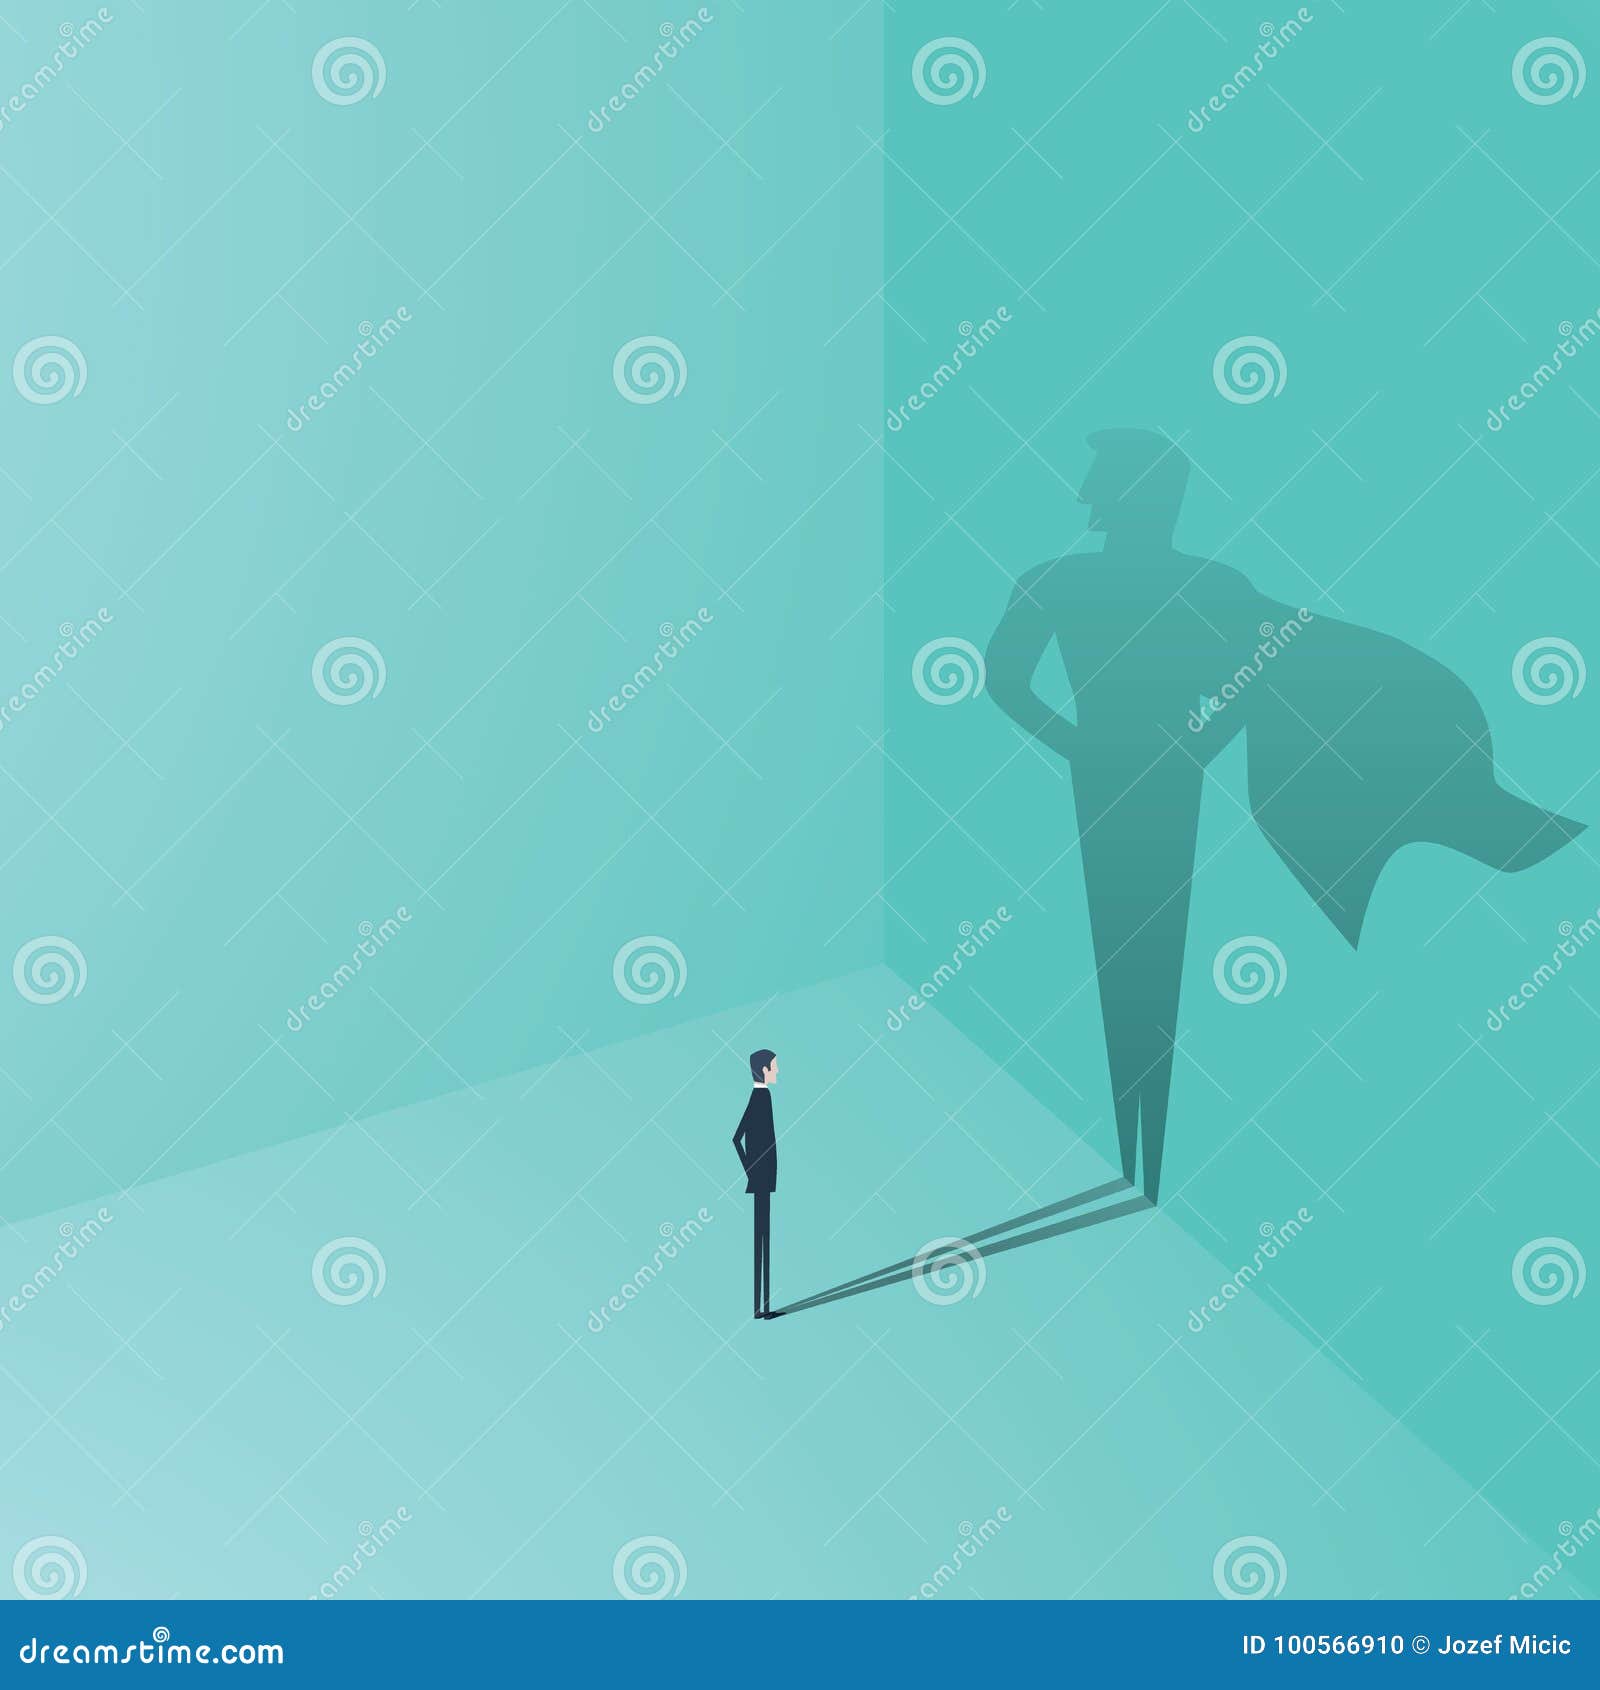 businessman with superhero shadow  concept. business  of ambition, success, motivation, leadership, courage